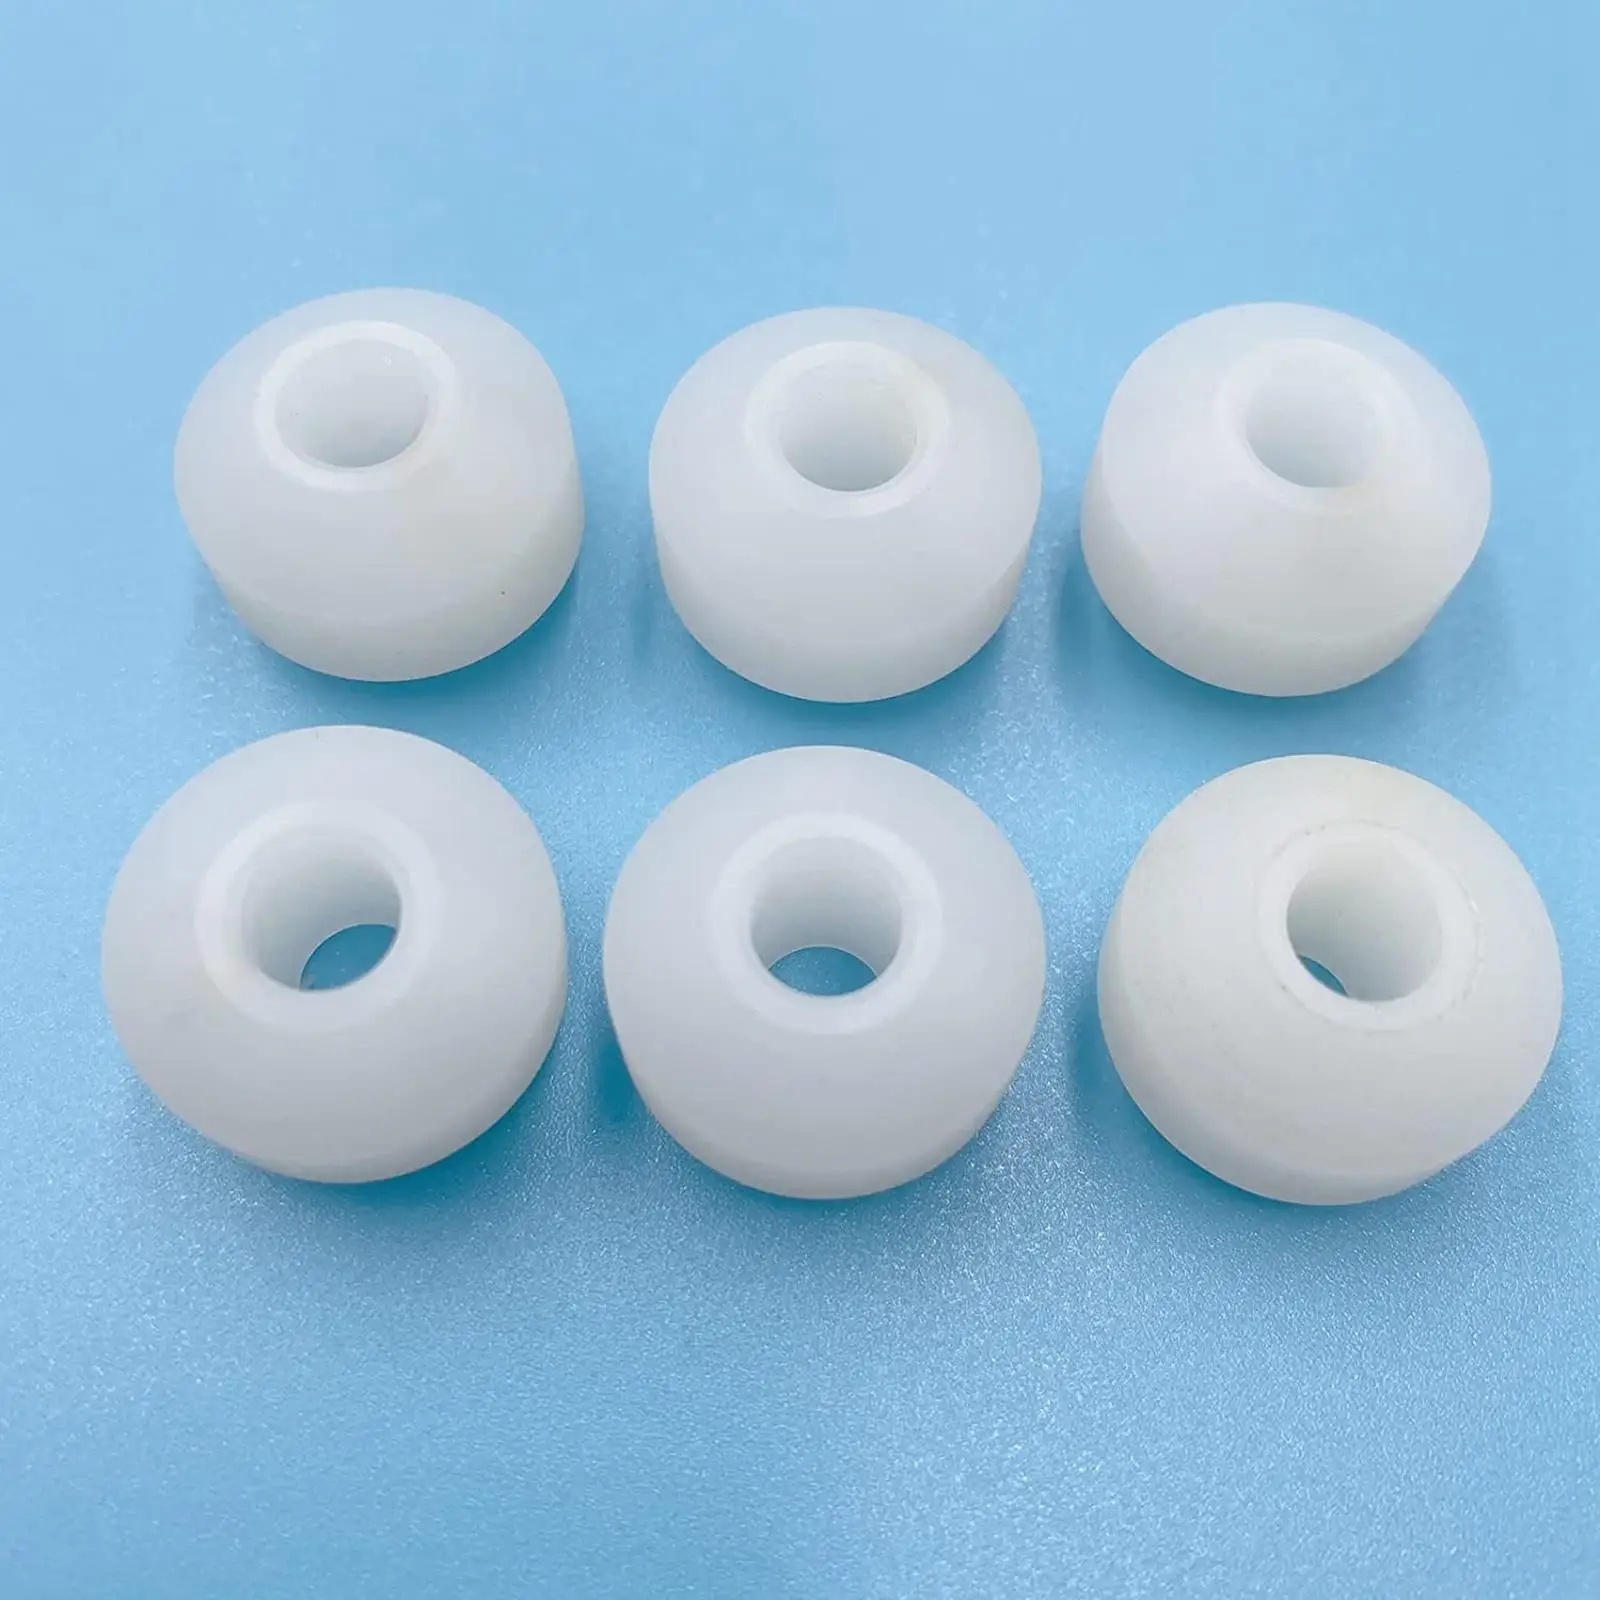 6Pcs Driven Clutch Roller Plastic for Arctic Cat Parts Accessories Replace Easy to Install